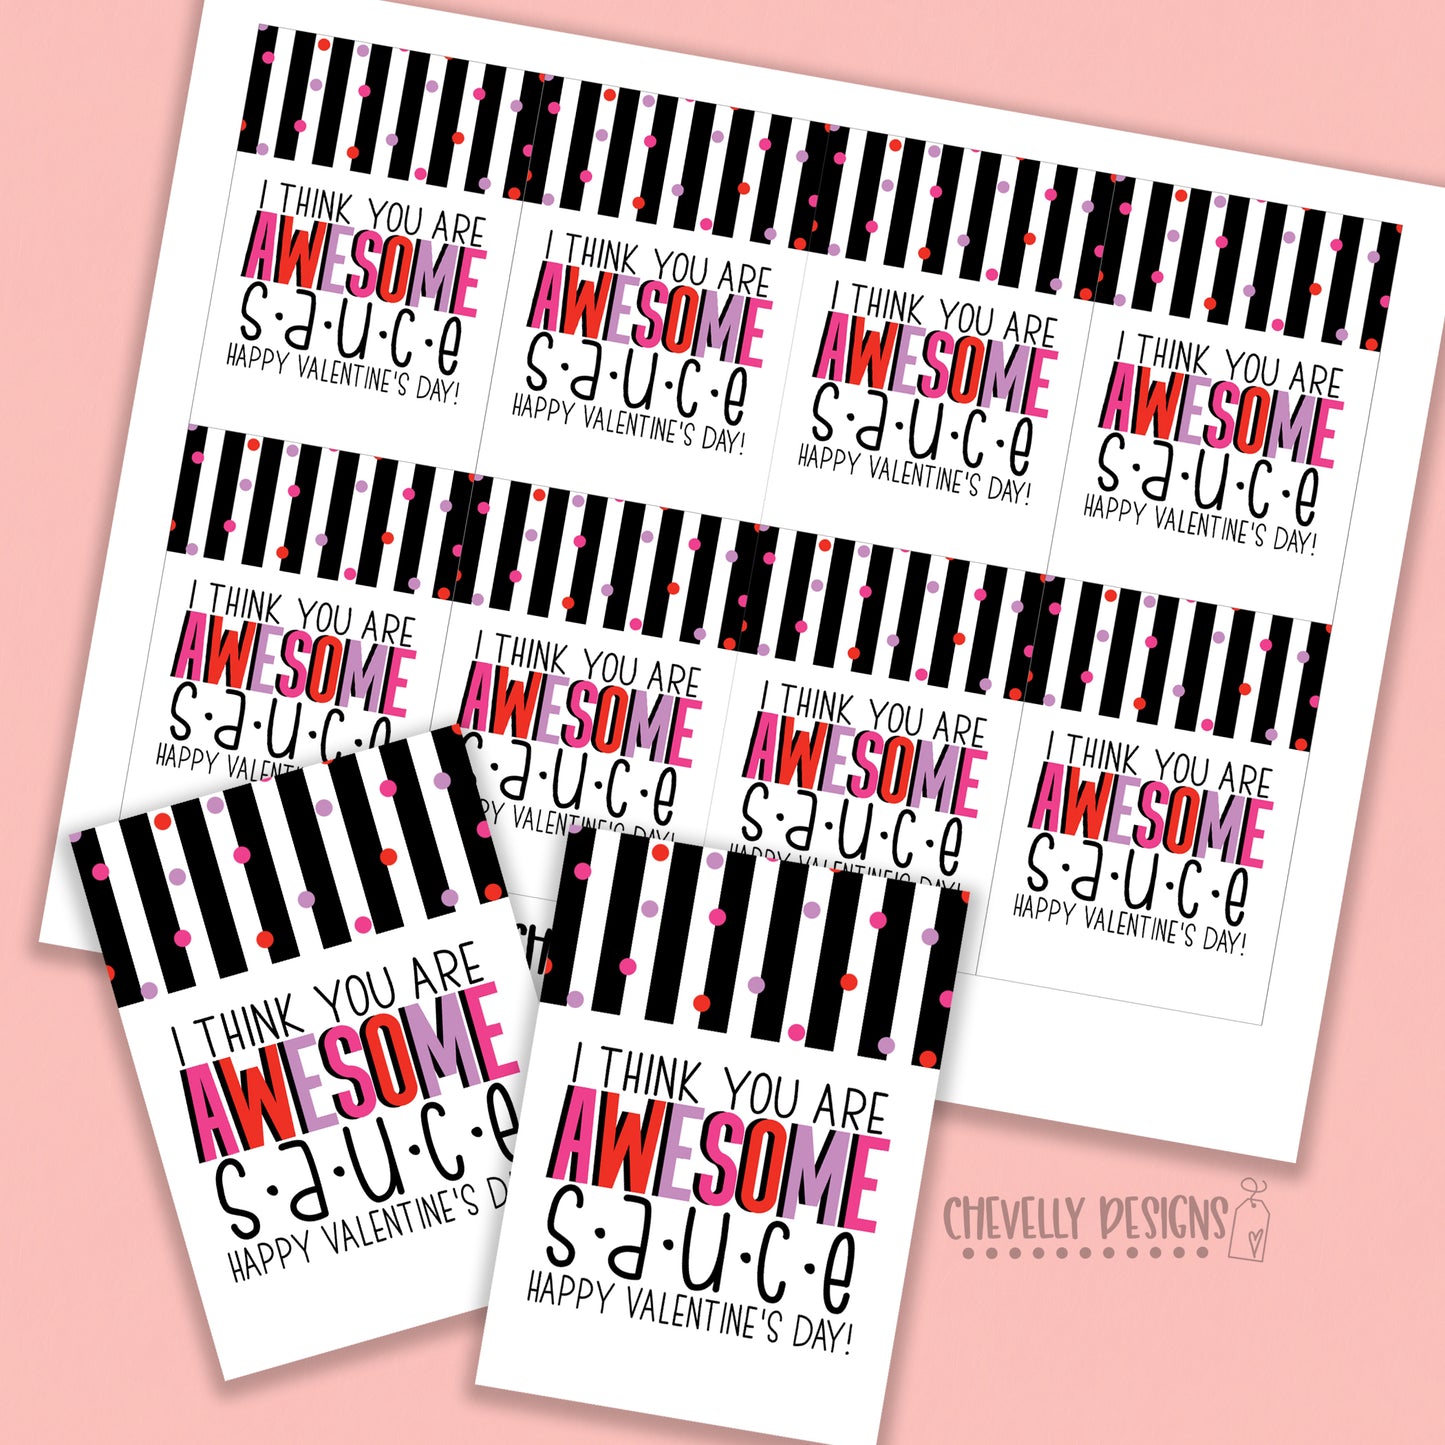 Printable - I Think You are Awesome Sauce - Valentine's Day Cards for Kids - Digital Download